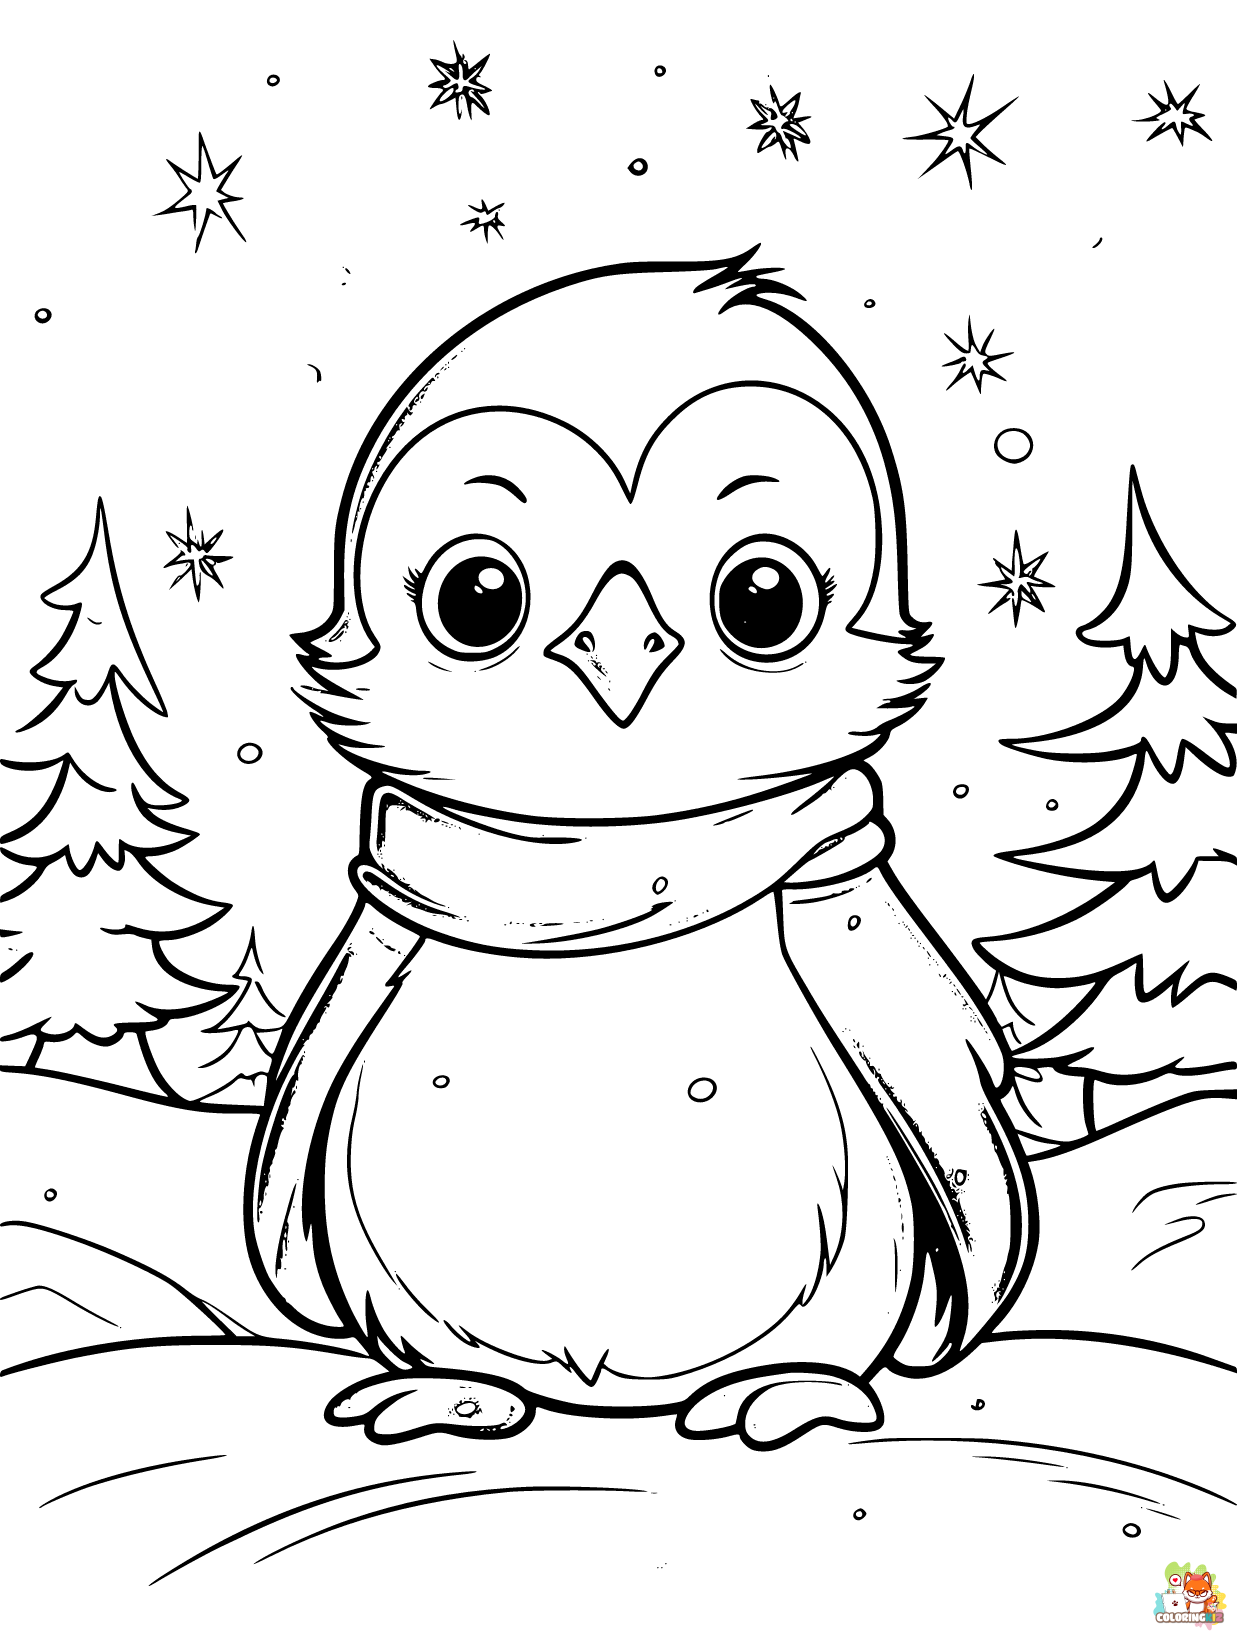 Penguin coloring pages 2